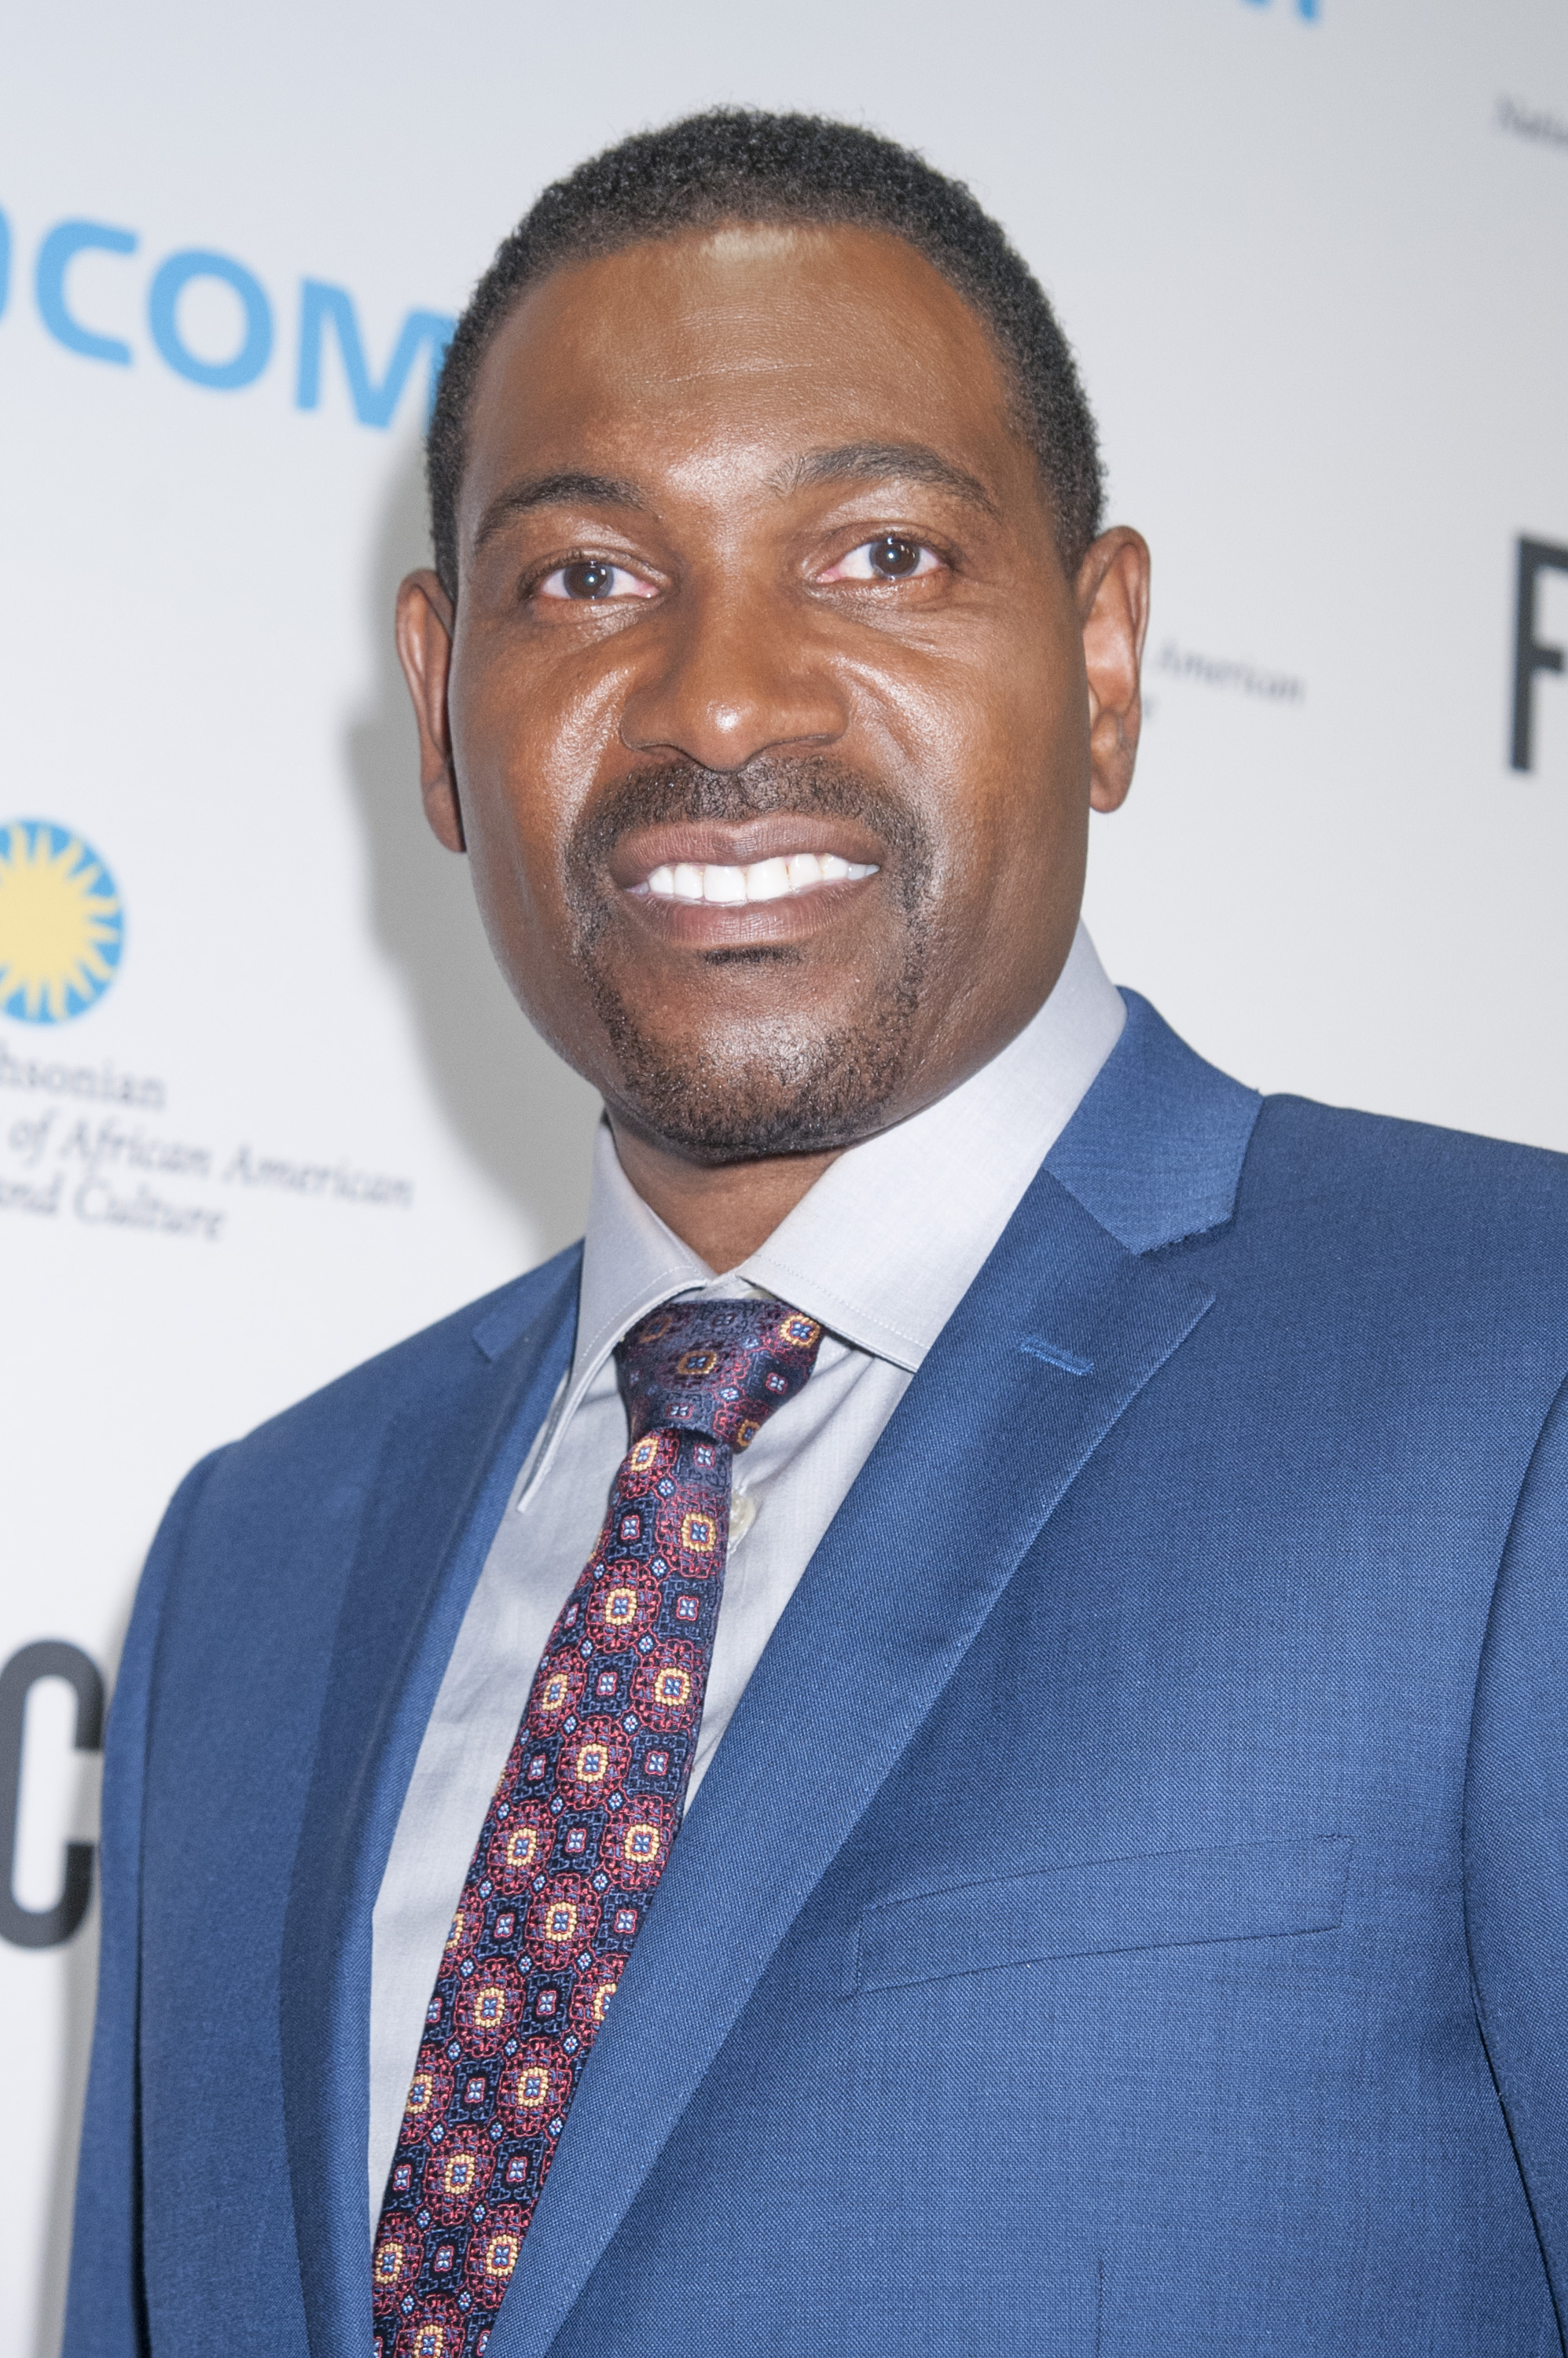 WASHINGTON DC - DEC 6: Mykelti Williamson attends a special screening of Paramount Pictures' new movie FENCES at The National Museum of African-American History and Culture on December 6th, 2016 in Washington DC. (Photo by Kris Connor for Paramount Pictures)